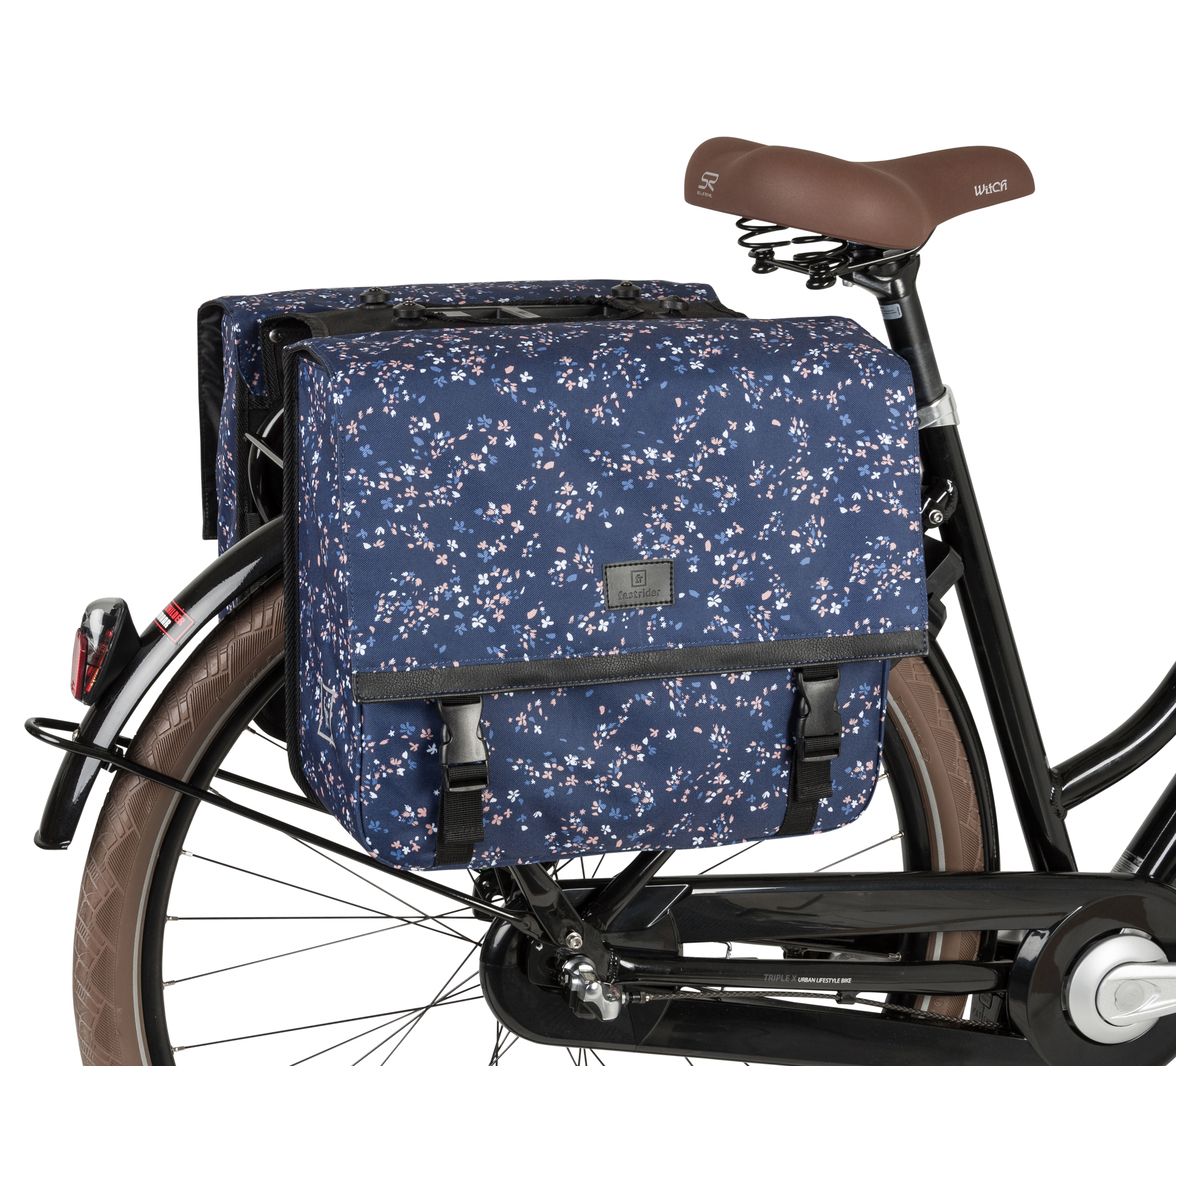 Fastrider Nara Double Bike Bag Trend fit example